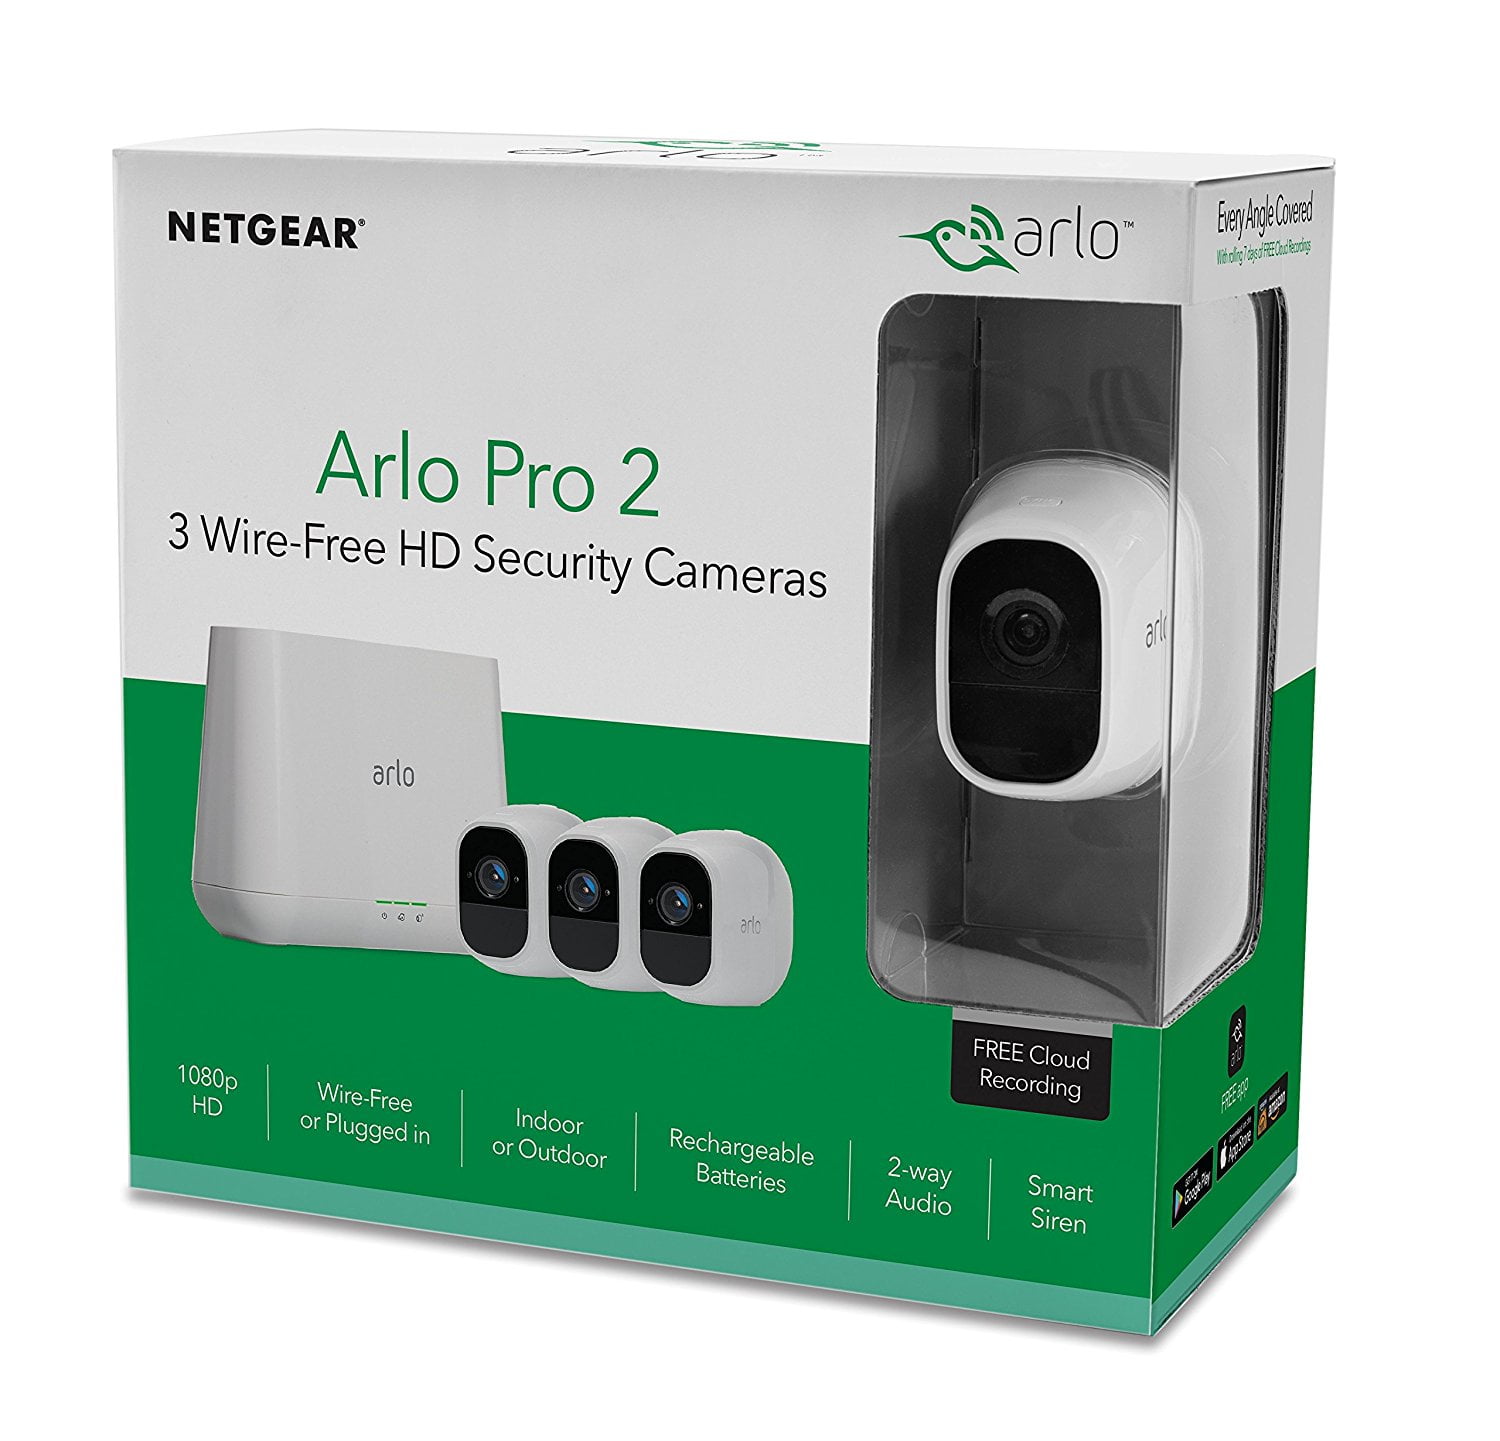 trompet Tal højt Vag Arlo Pro 2 - 3 Wire-Free Camera 1080P HD Smart Security System (VMS4330P-100NAS)  Motion Detection, Night Vision, Indoor/Outdoor, Two-Way Audio - Walmart.com